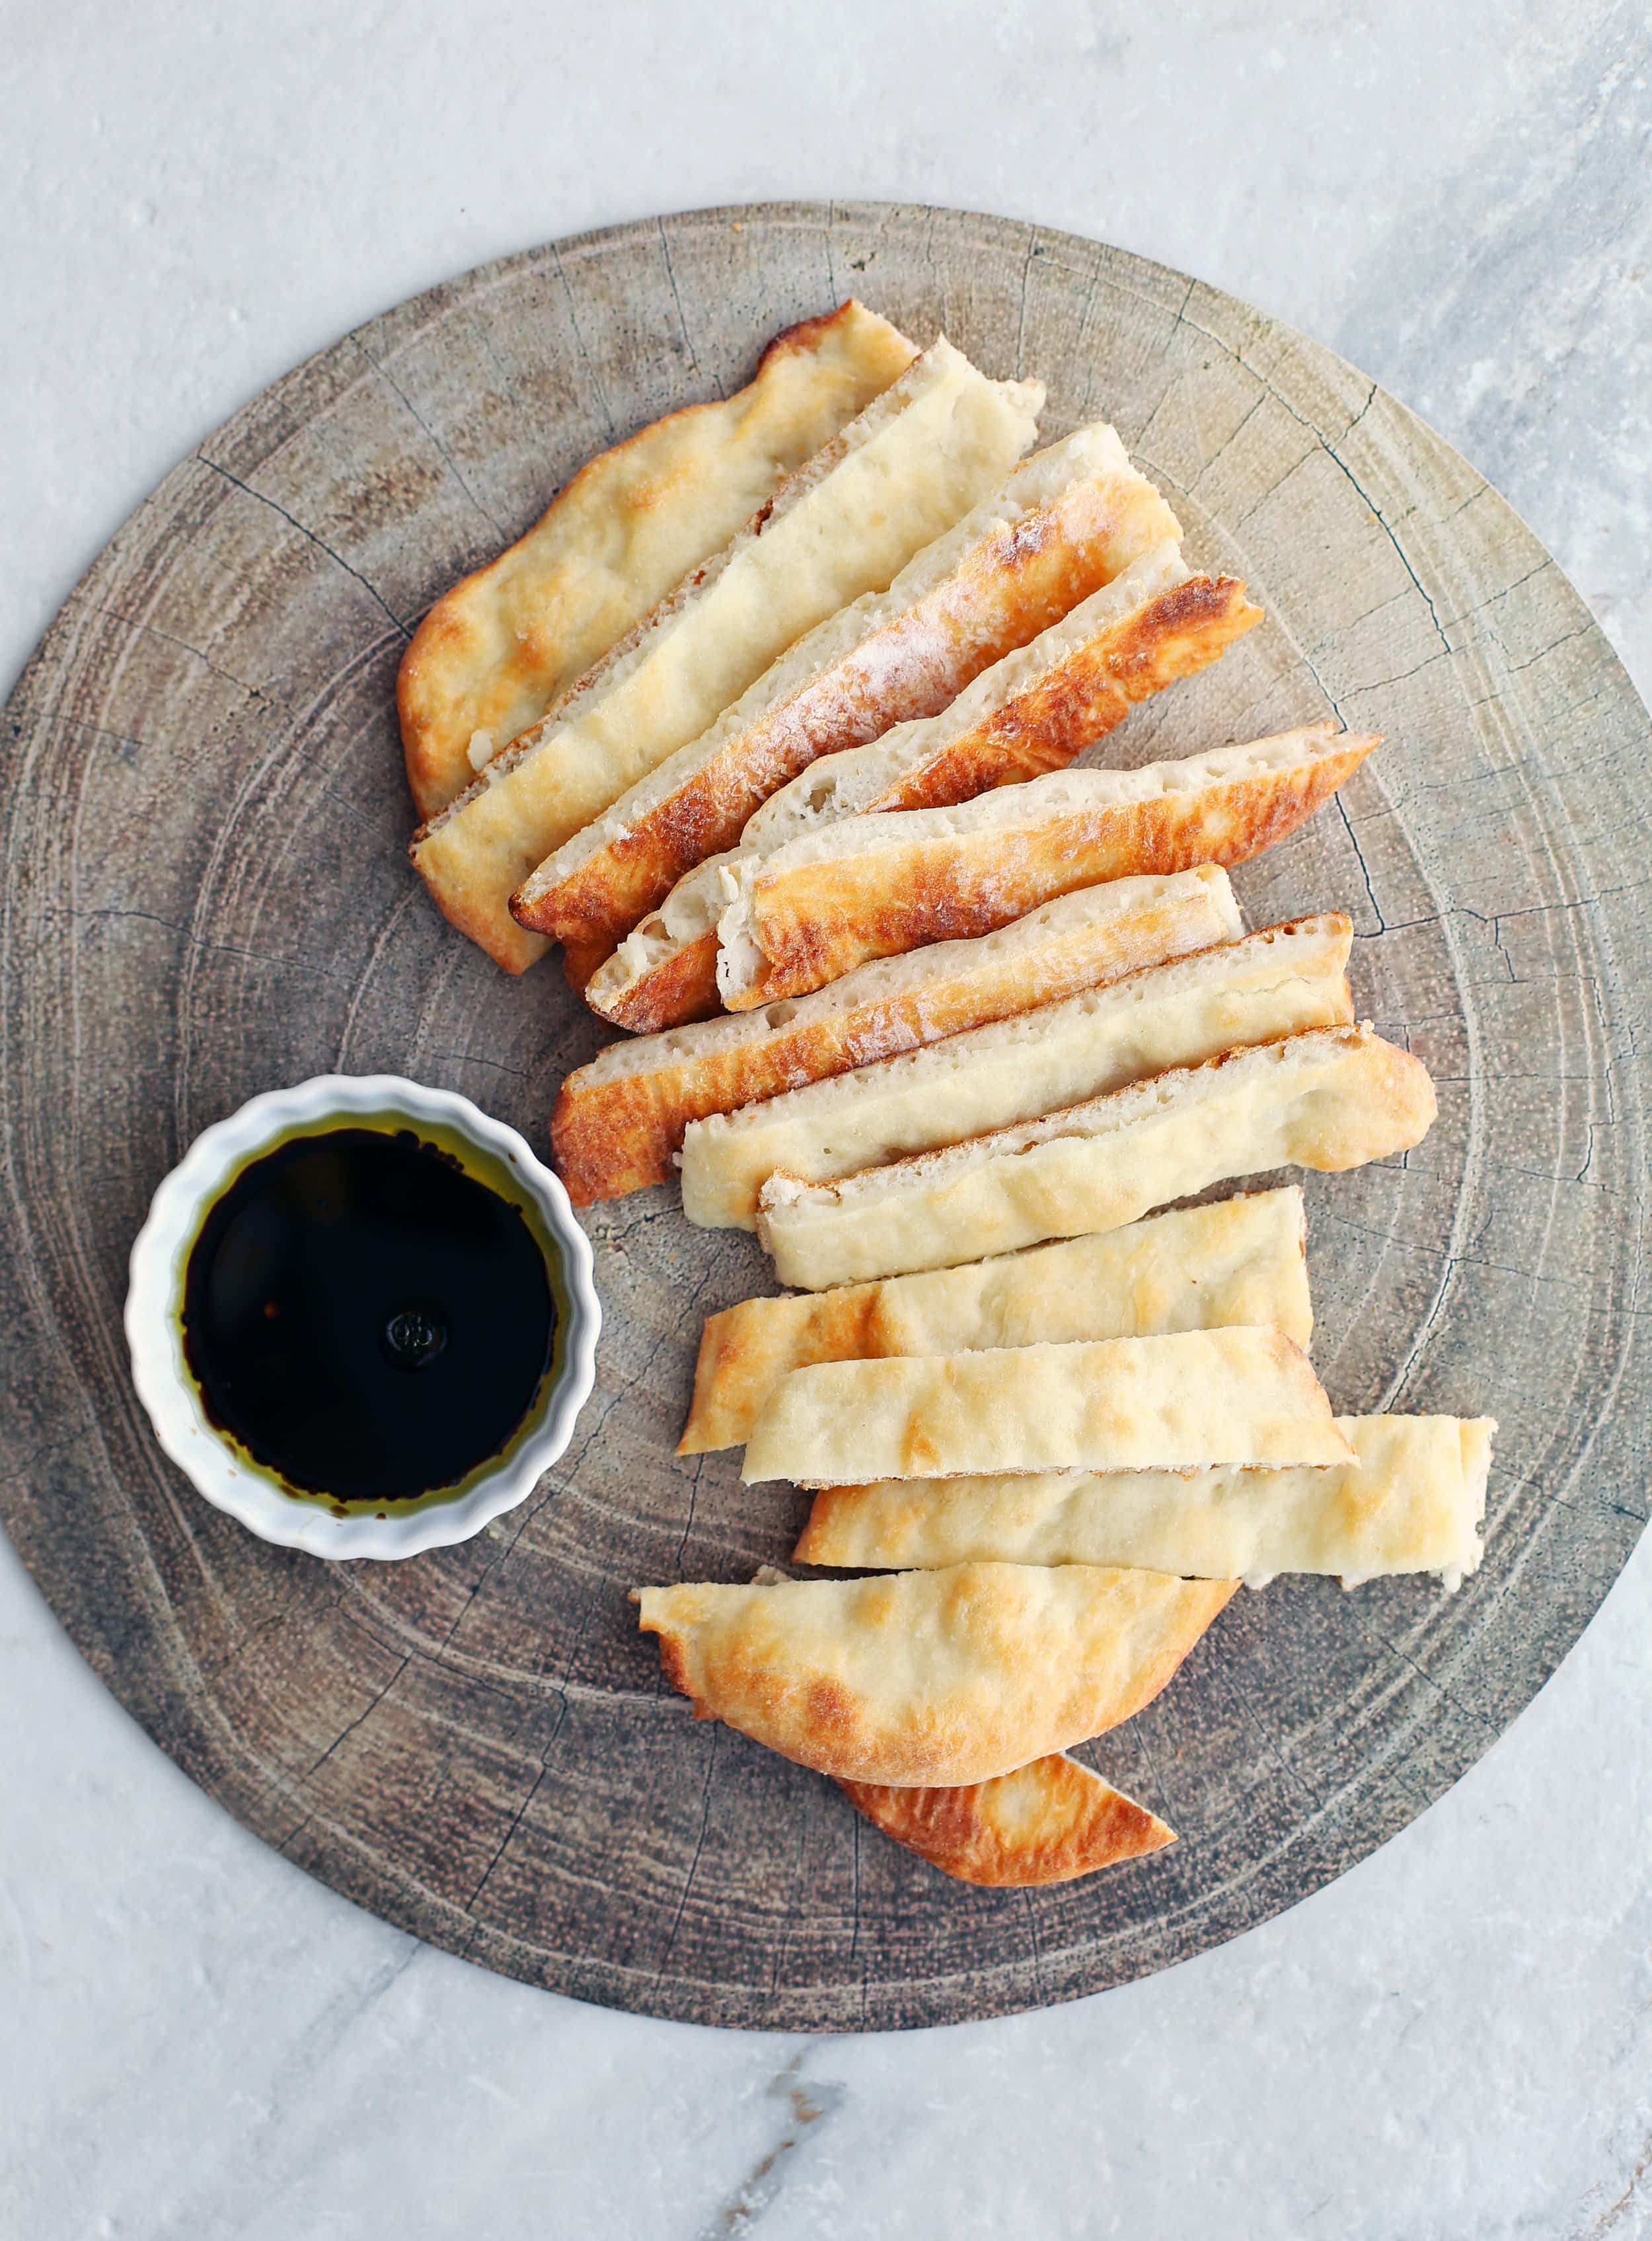 Sliced four-ingredient baked flatbread with balsamic-olive oil dip on a round platter.